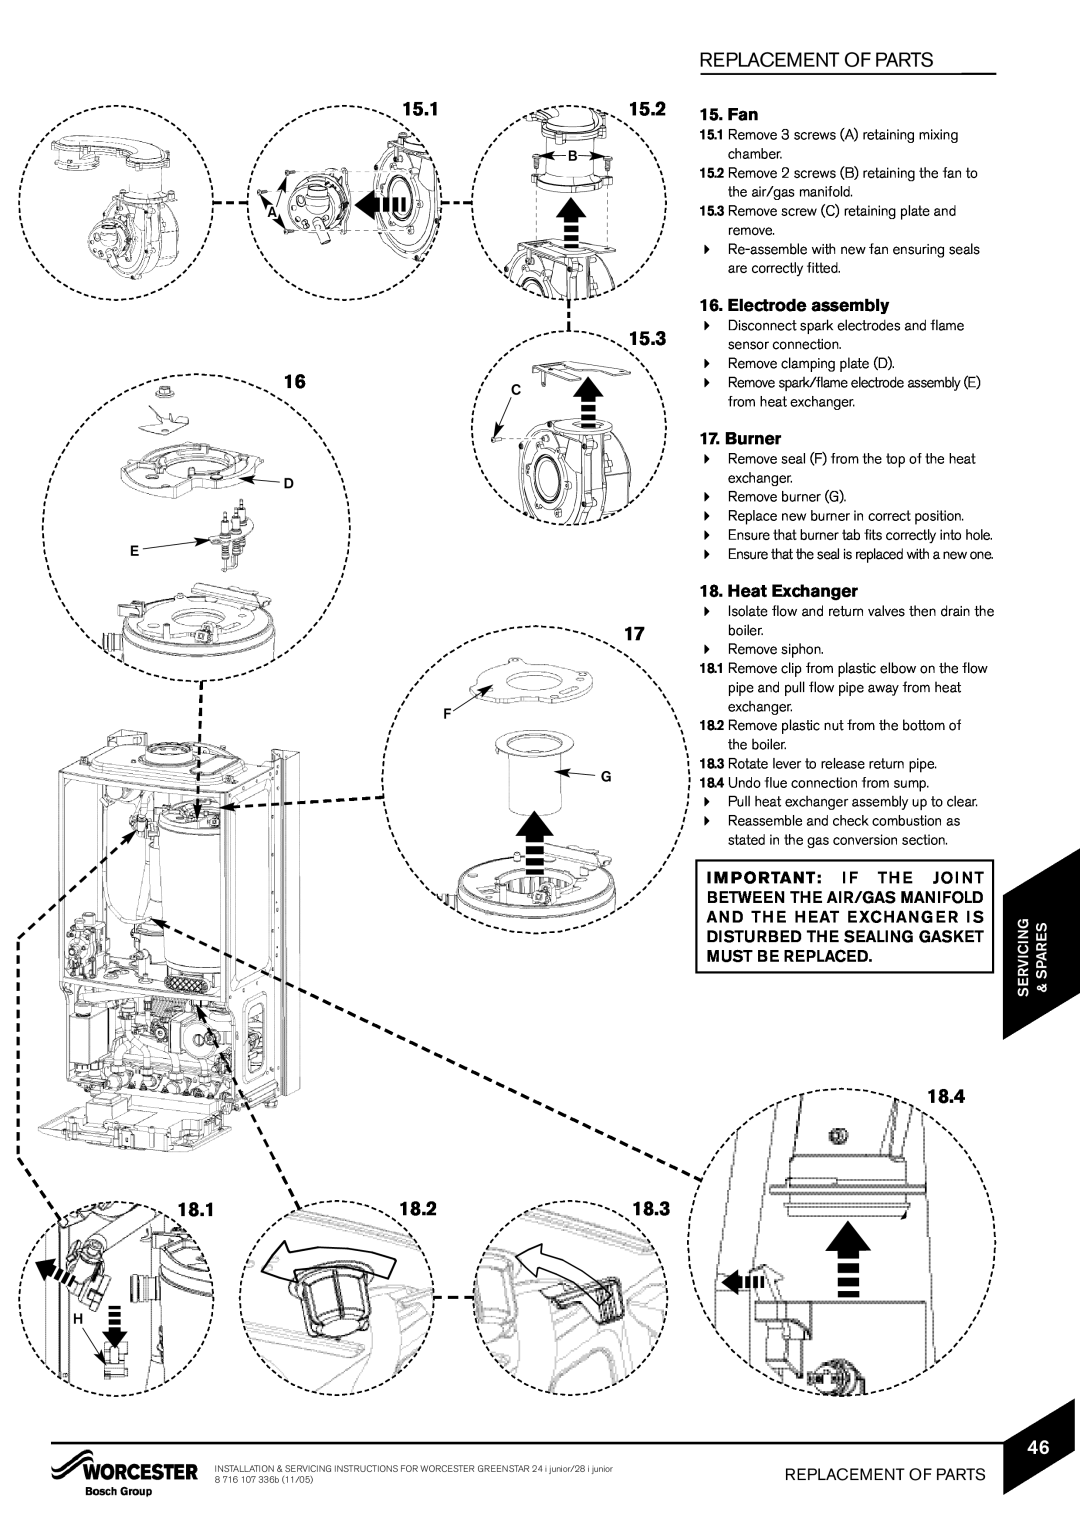 Bosch Appliances 24i junior manual Replacement Of Parts, 15.1, 15.2, 15.3, 18.4, 18.1, 18.2, 18.3, Fan, Electrode assembly 